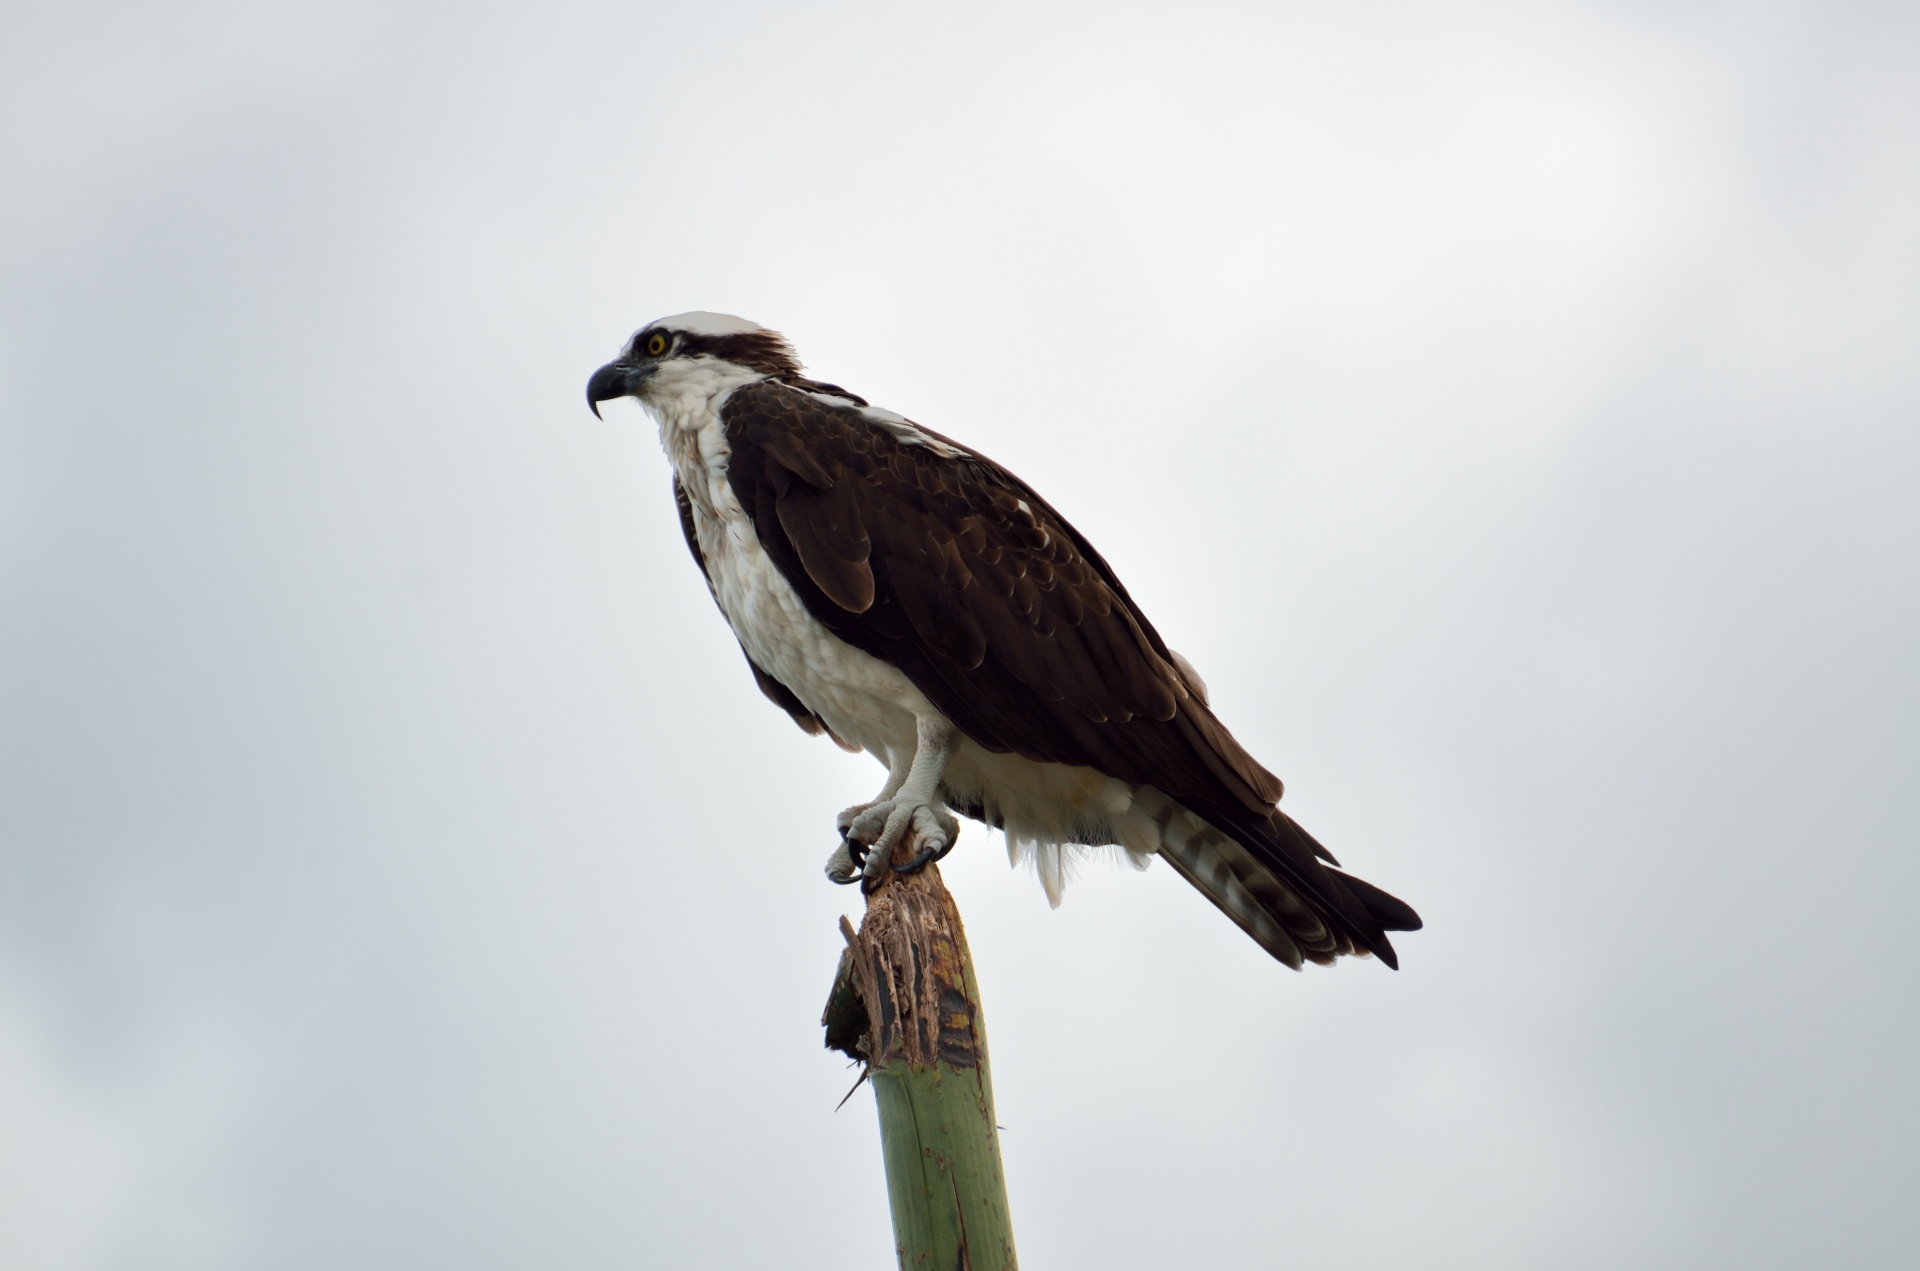 Osprey facts and information | Trees for Life